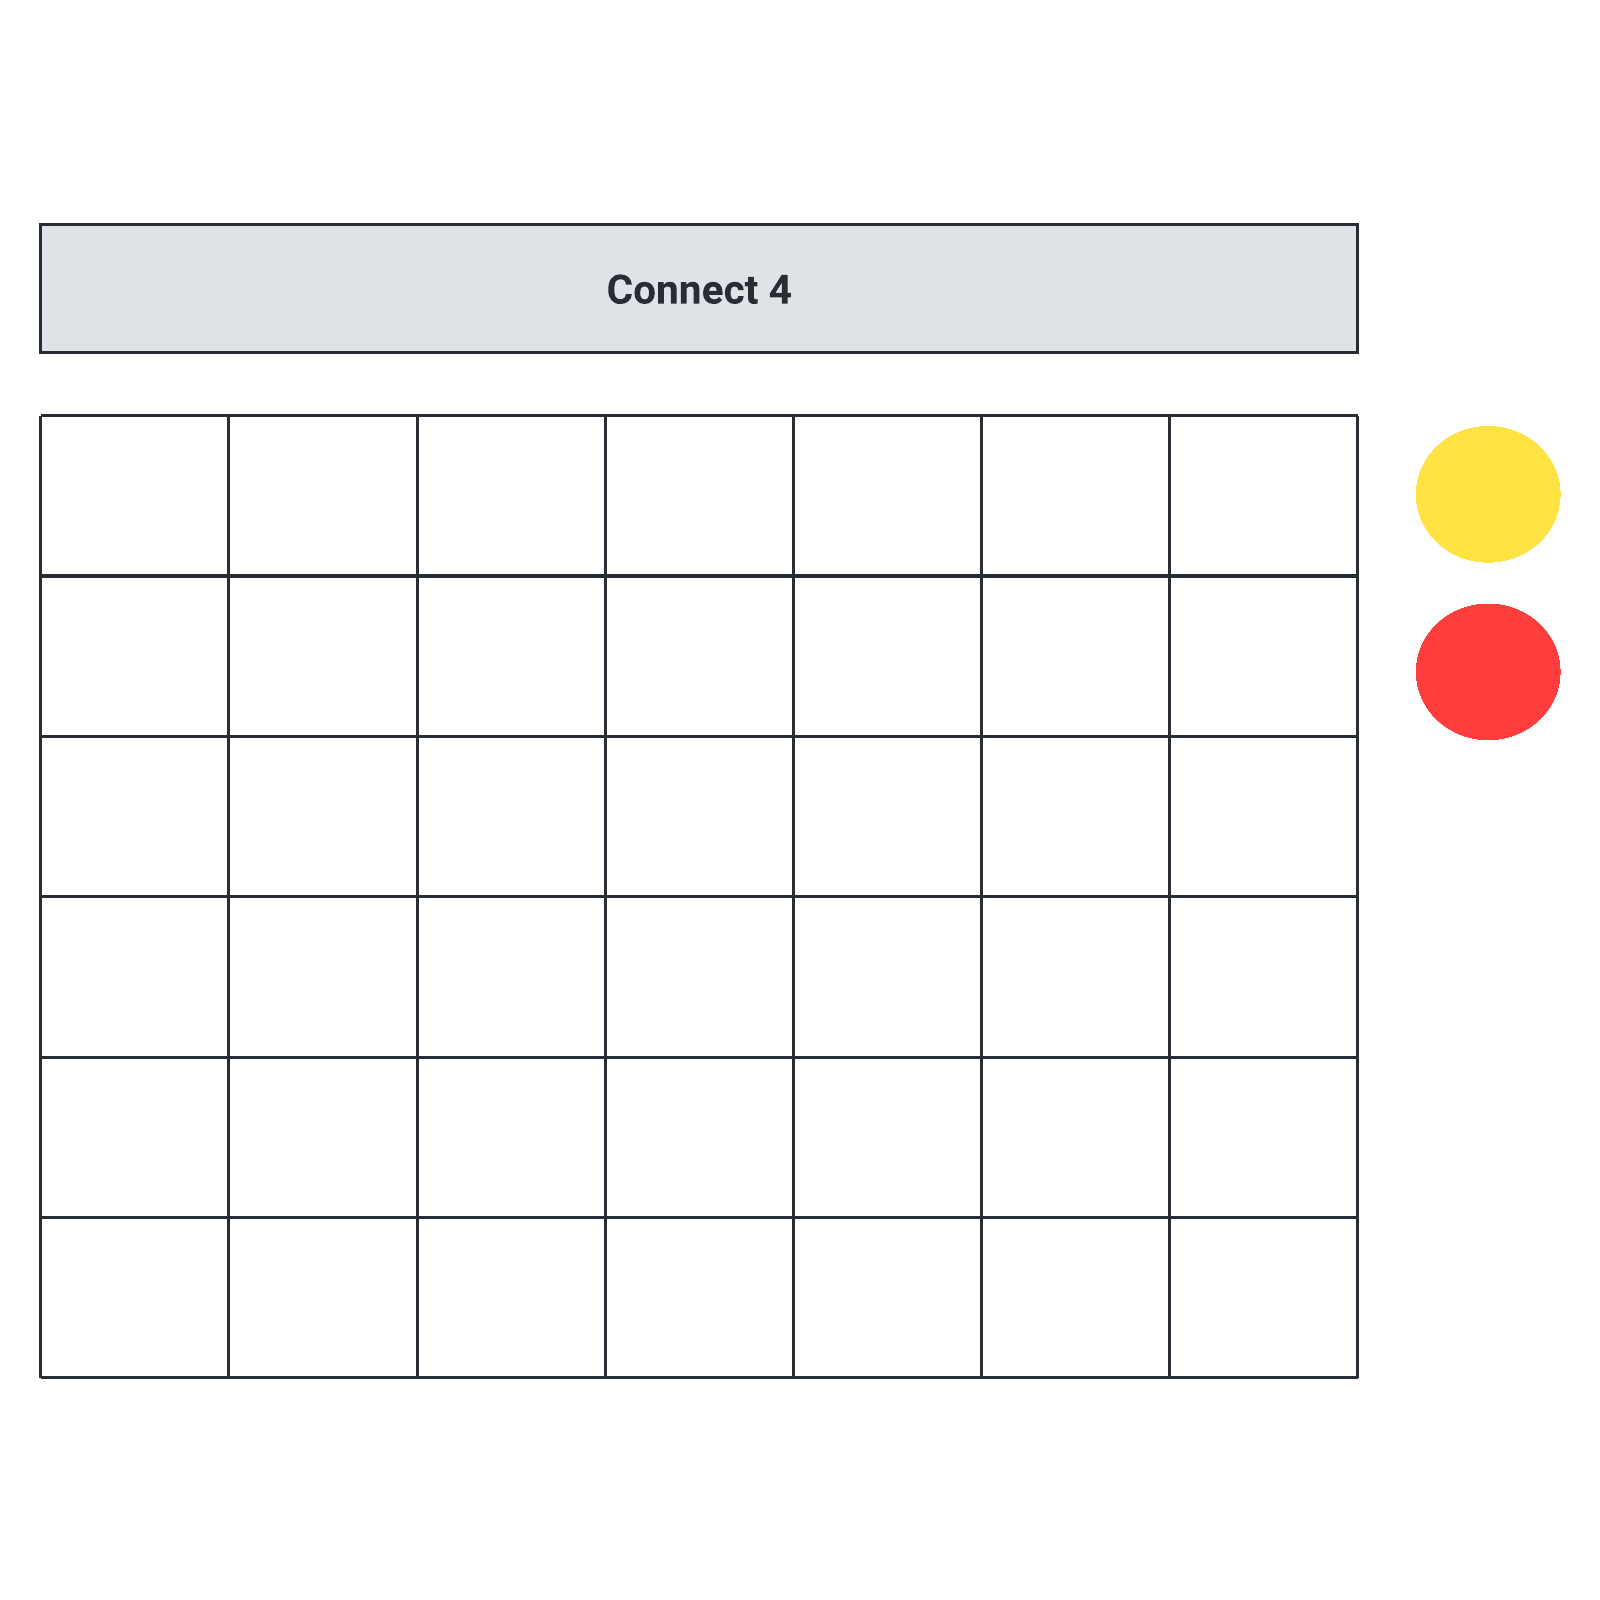 Connect 4 example